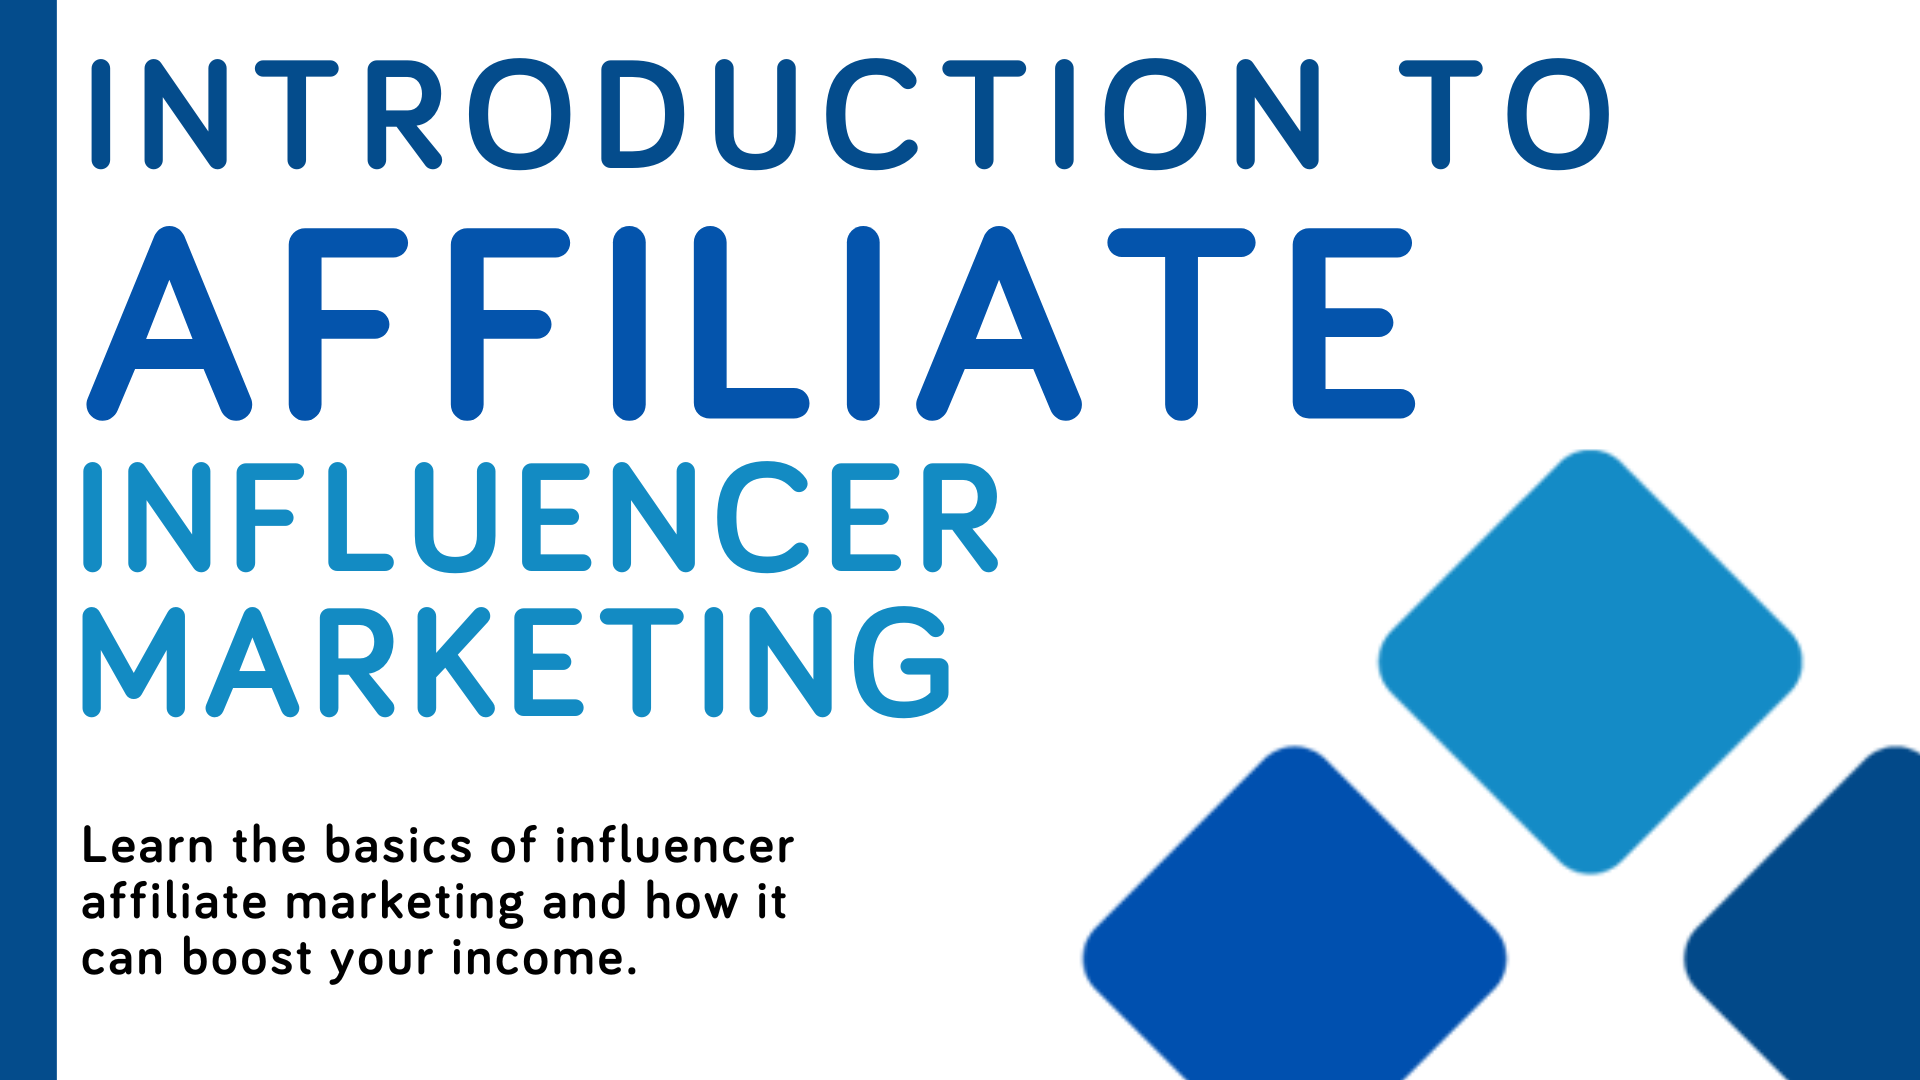 A Brief Introduction to Influencer Marketing